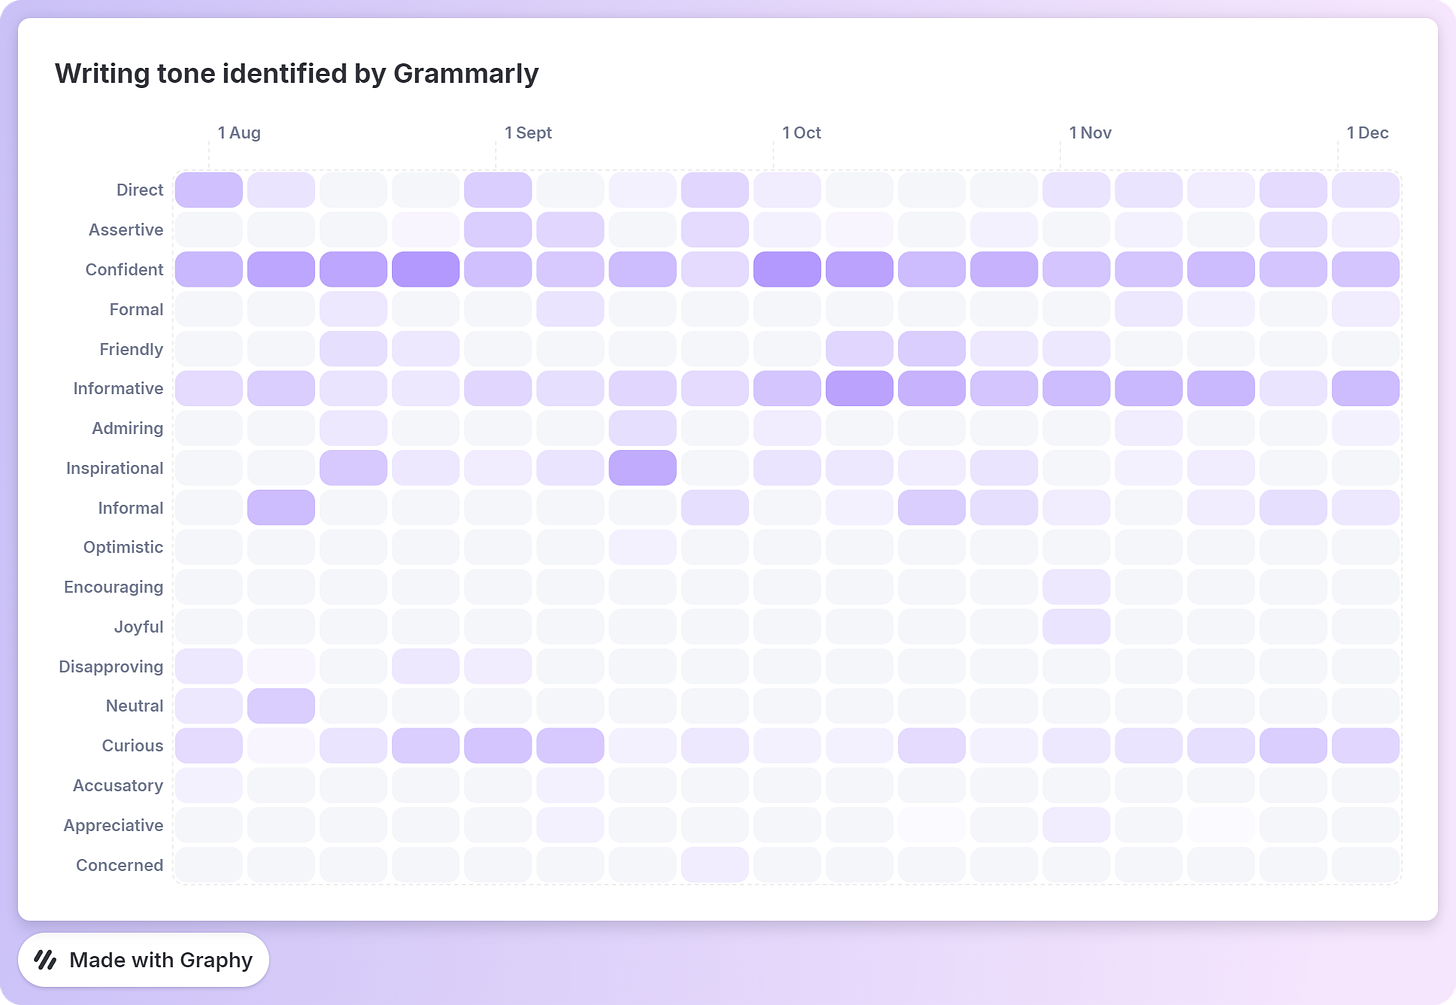 From Grammarly’s email. I wish they included an option to see graphs by default.